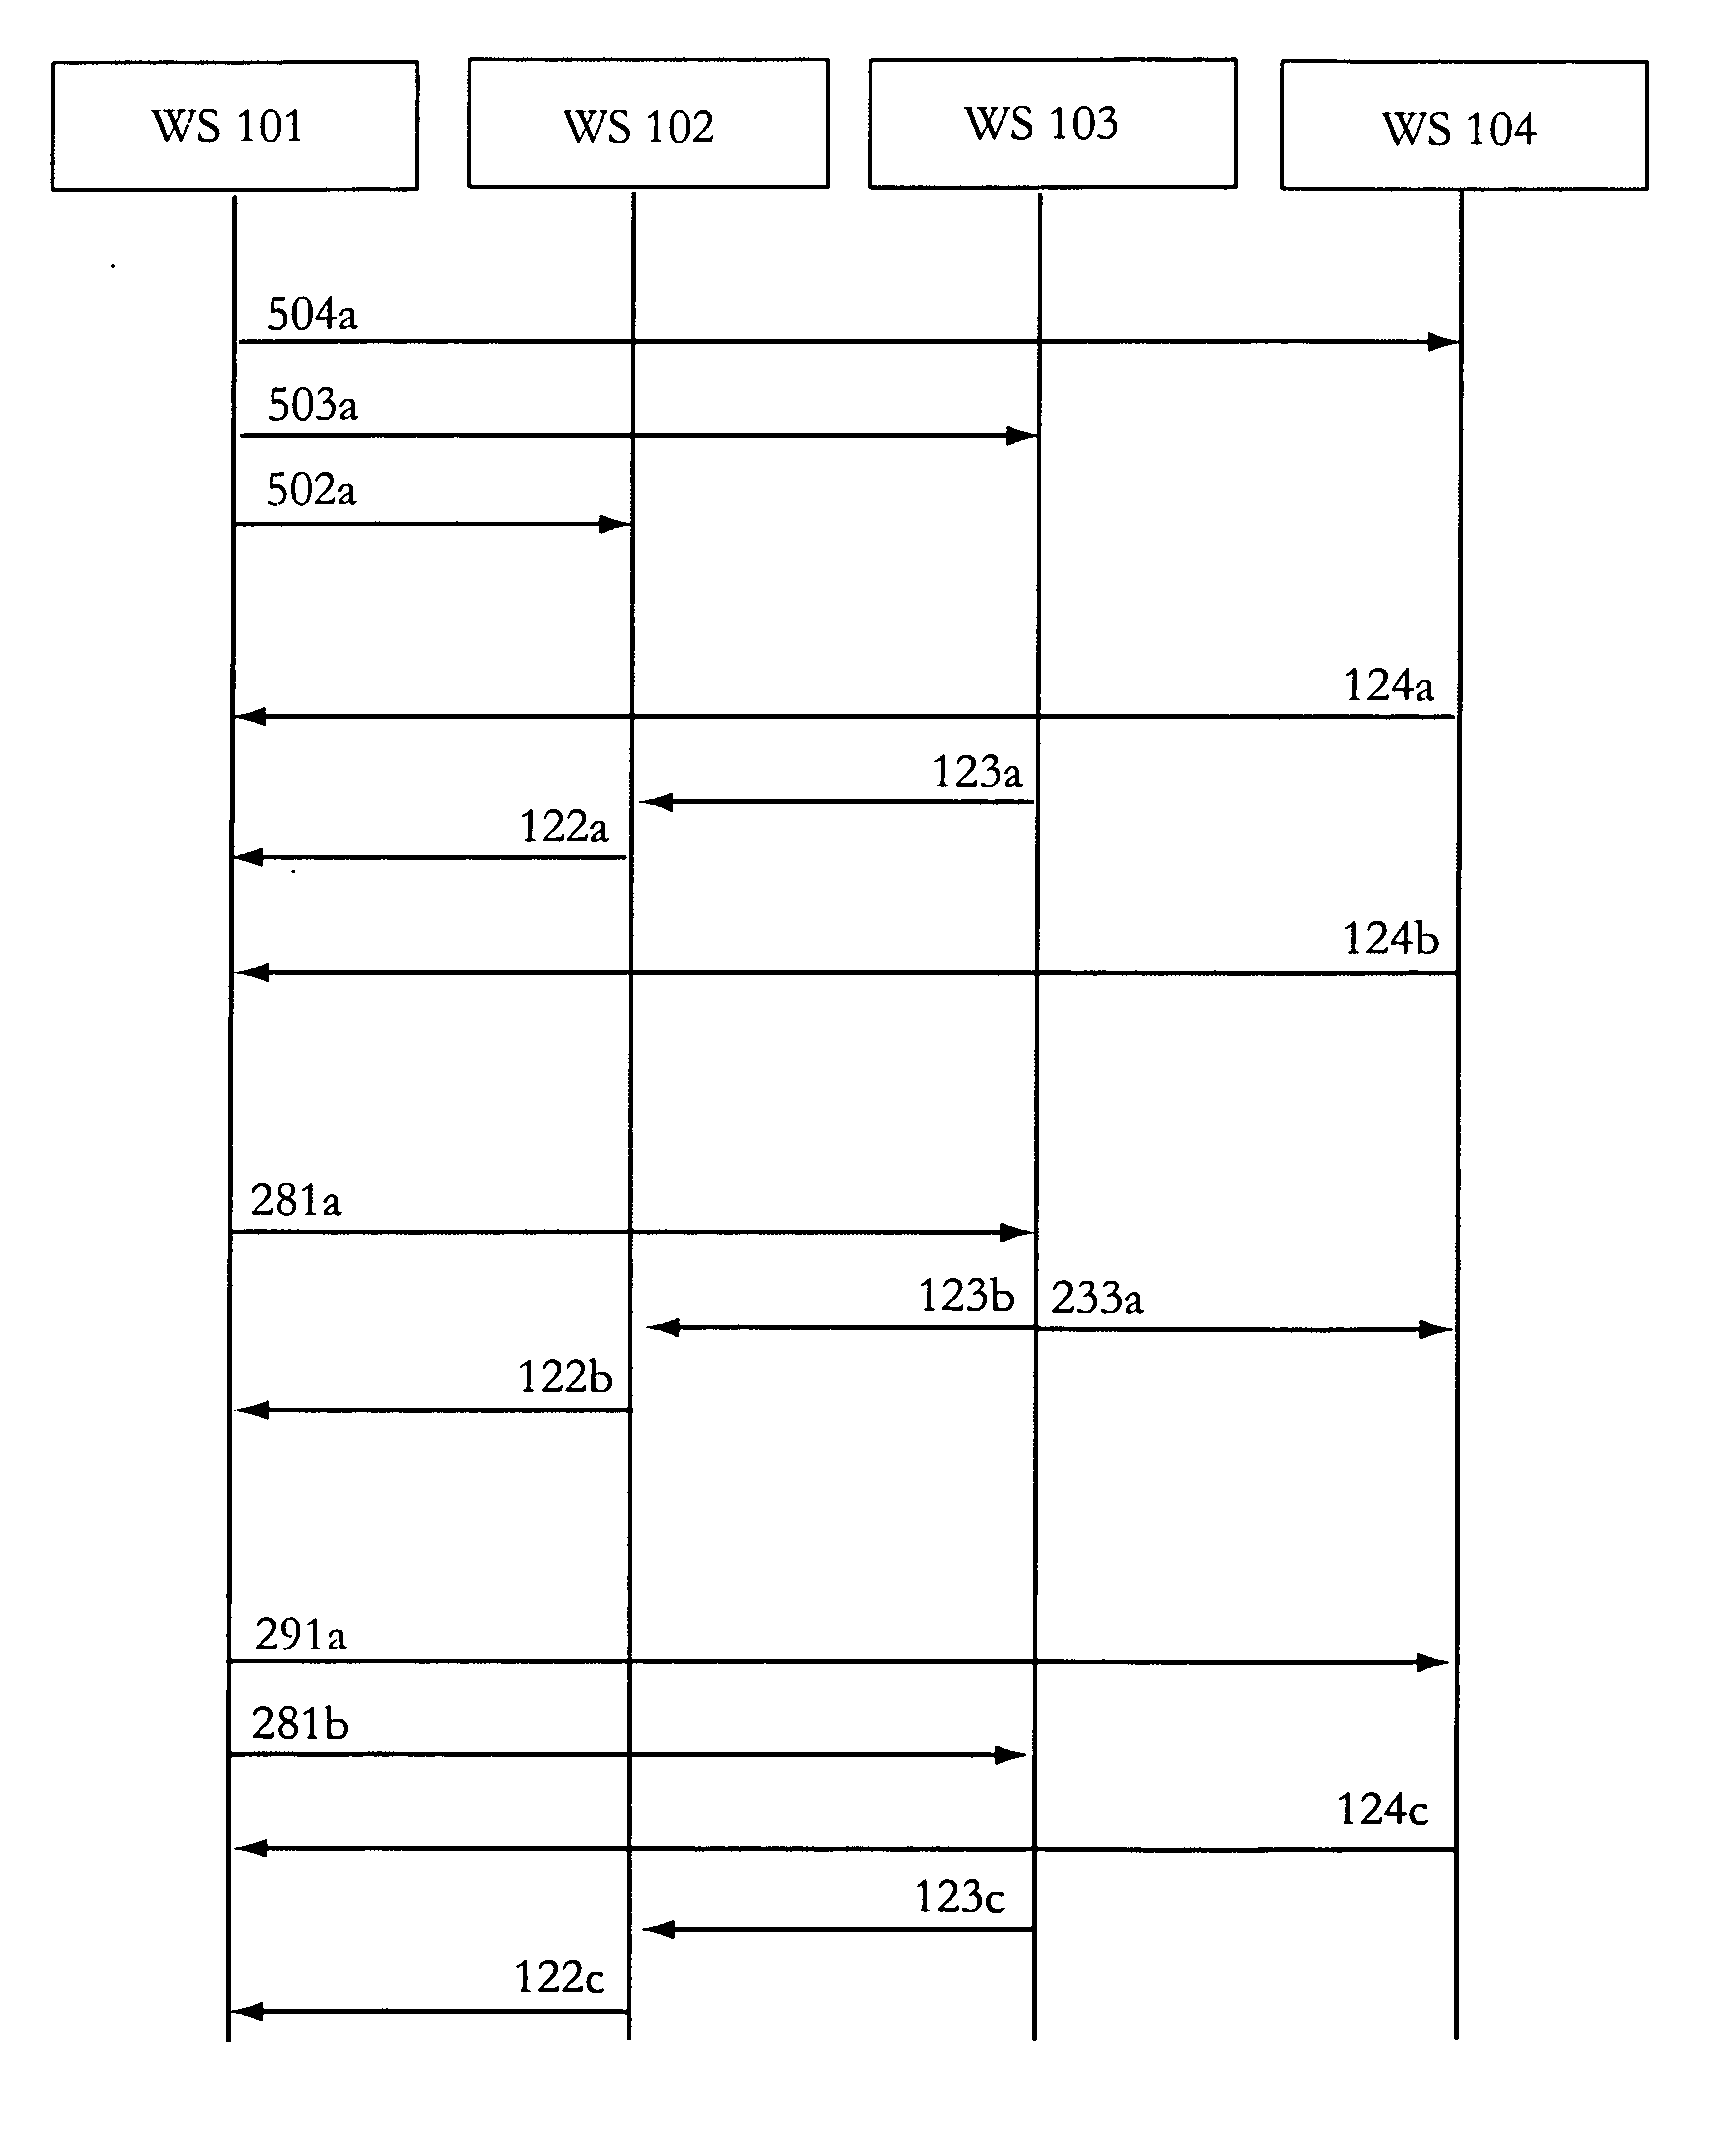 System and method for minimizing transfer of motion picture data manipulated with outsourced labor